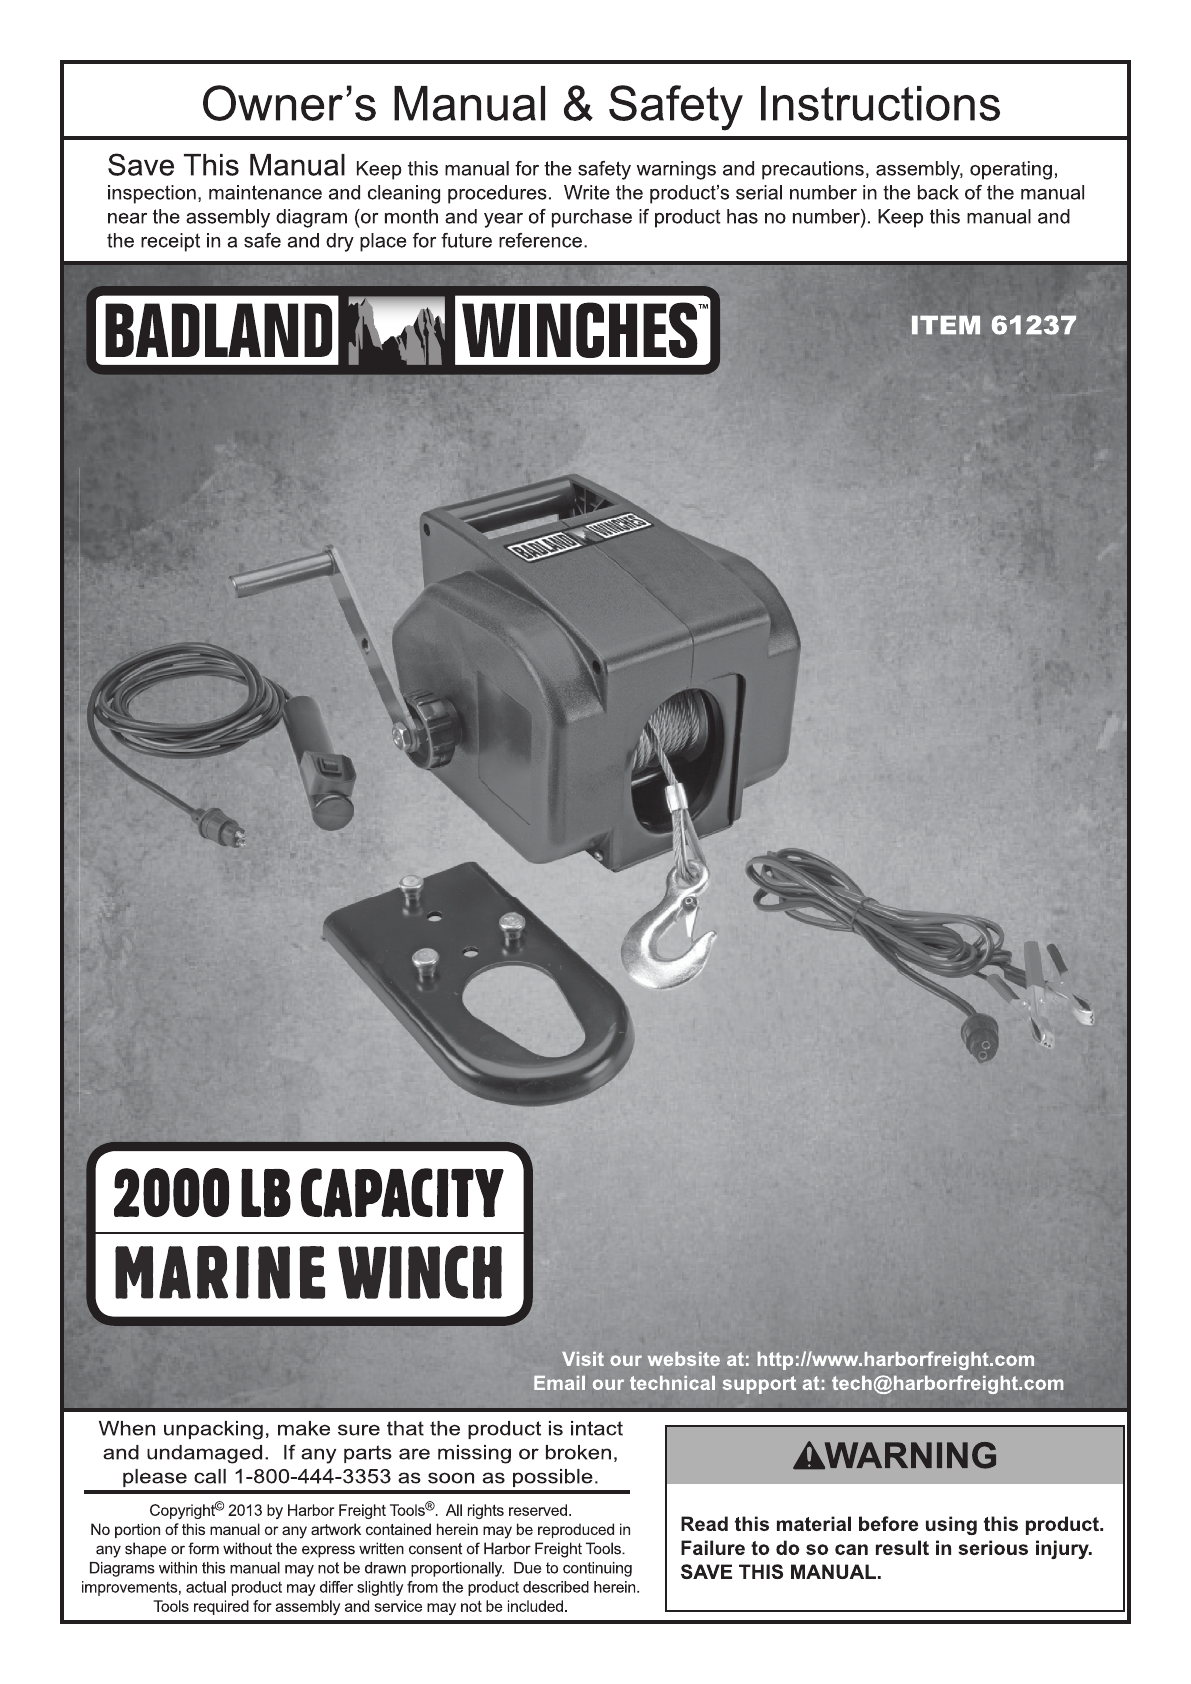 Harbor Freight 2000 Lb Marine Electric Winch Product Manual